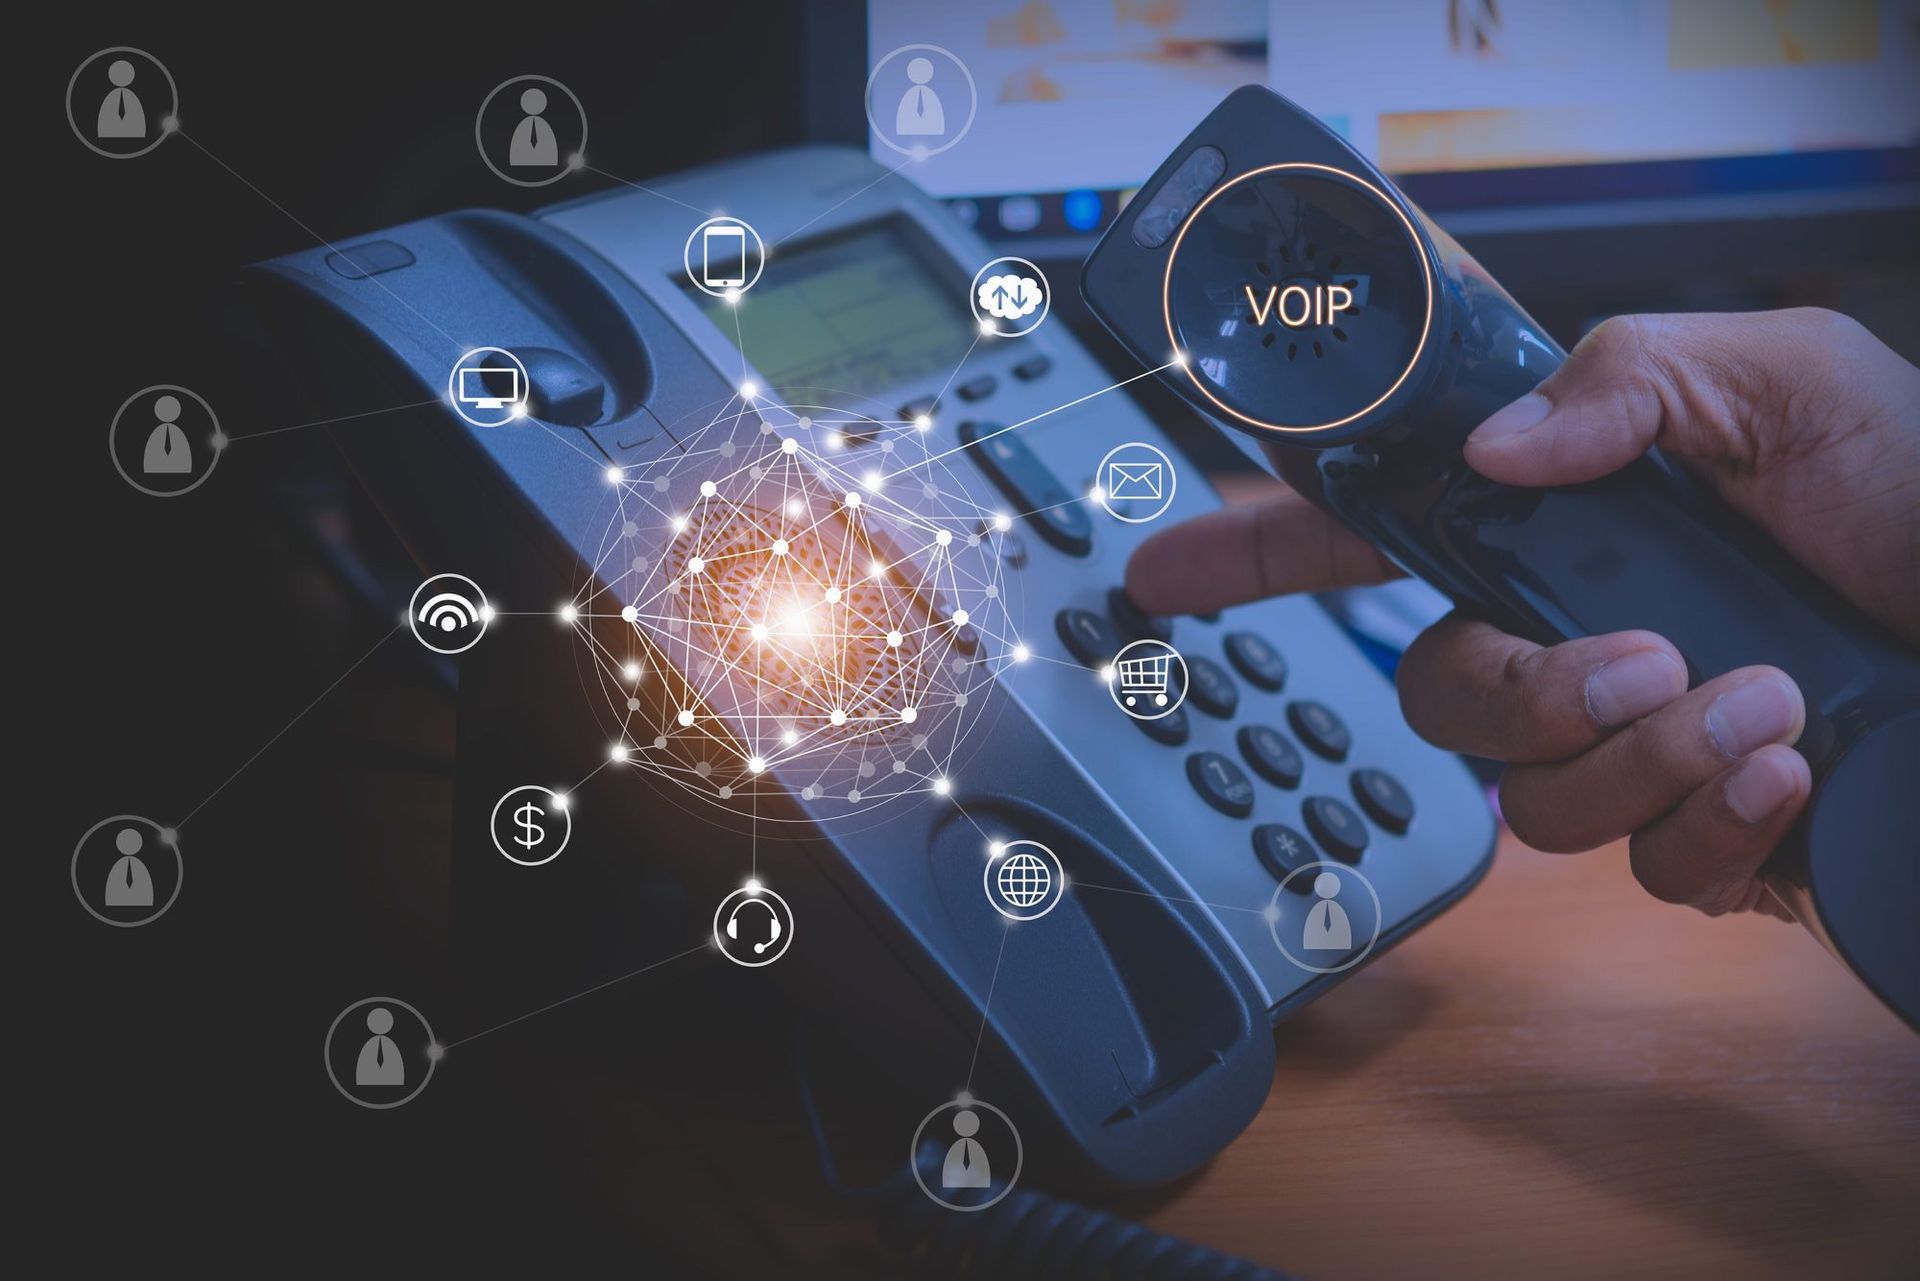 Dialling using a VoIP phone